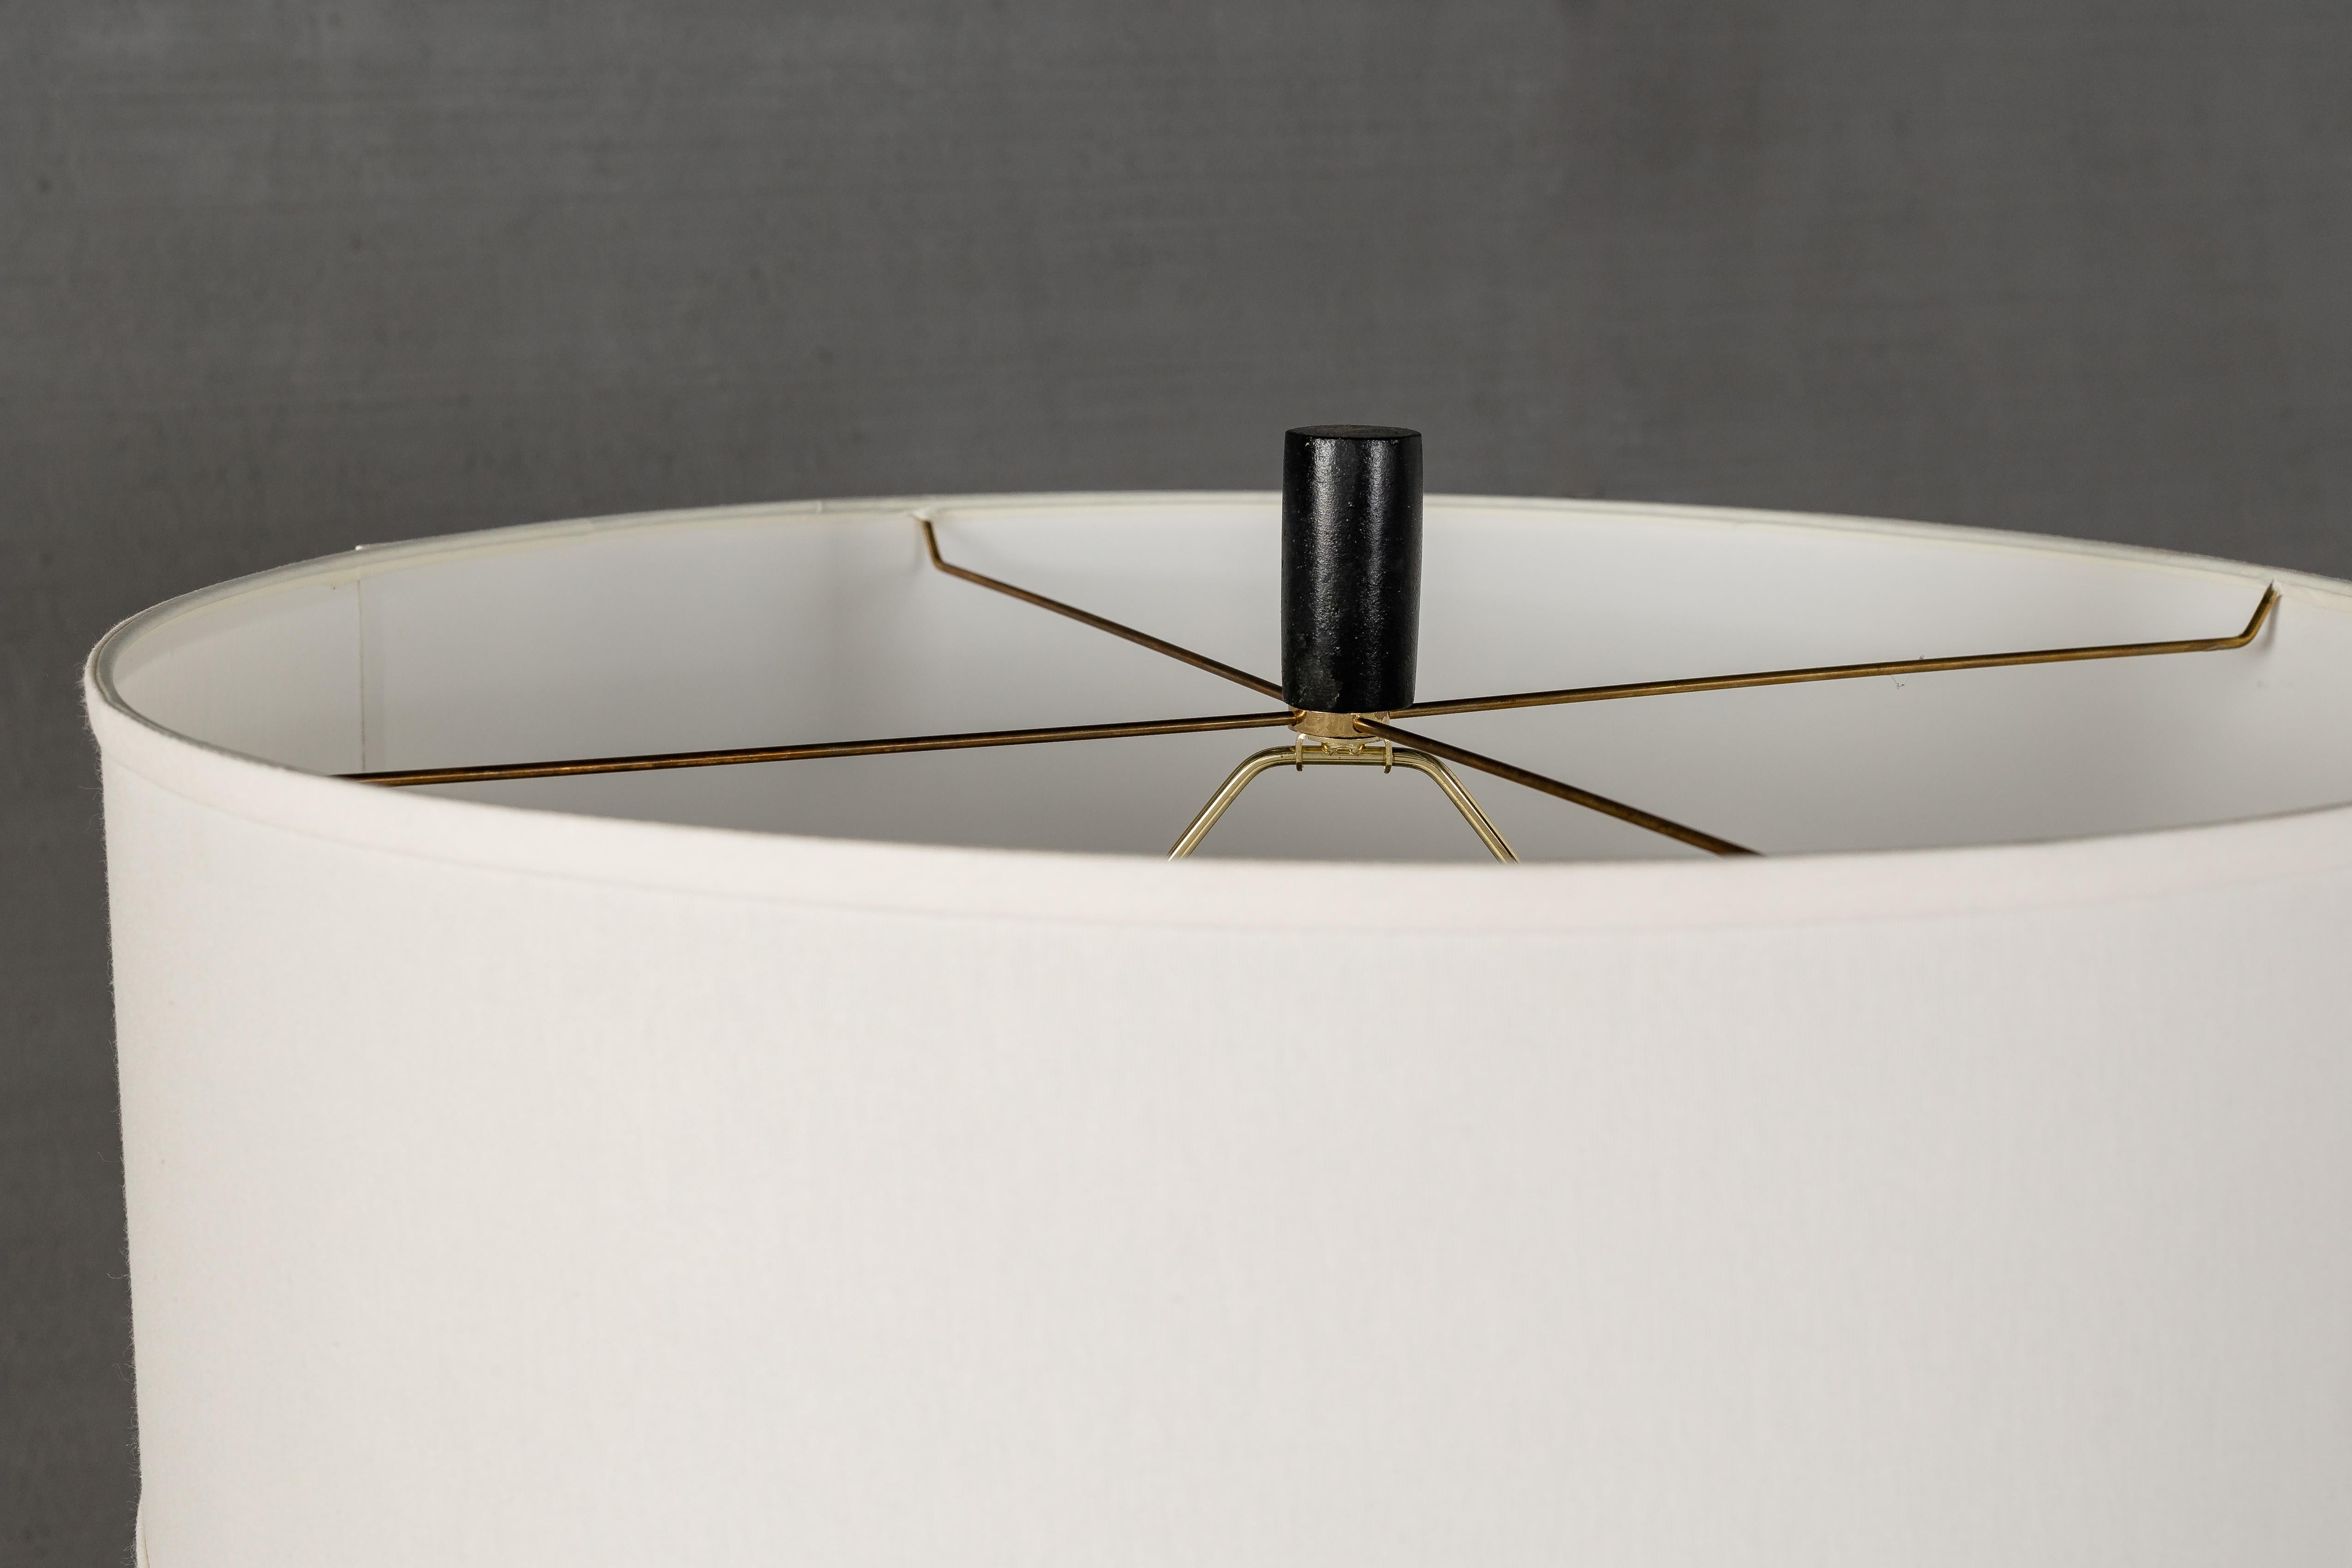 Stacked steel table lamp with white shade.

Designed by Brendan Bass, handcrafted in Italy.

Shade: 22.5